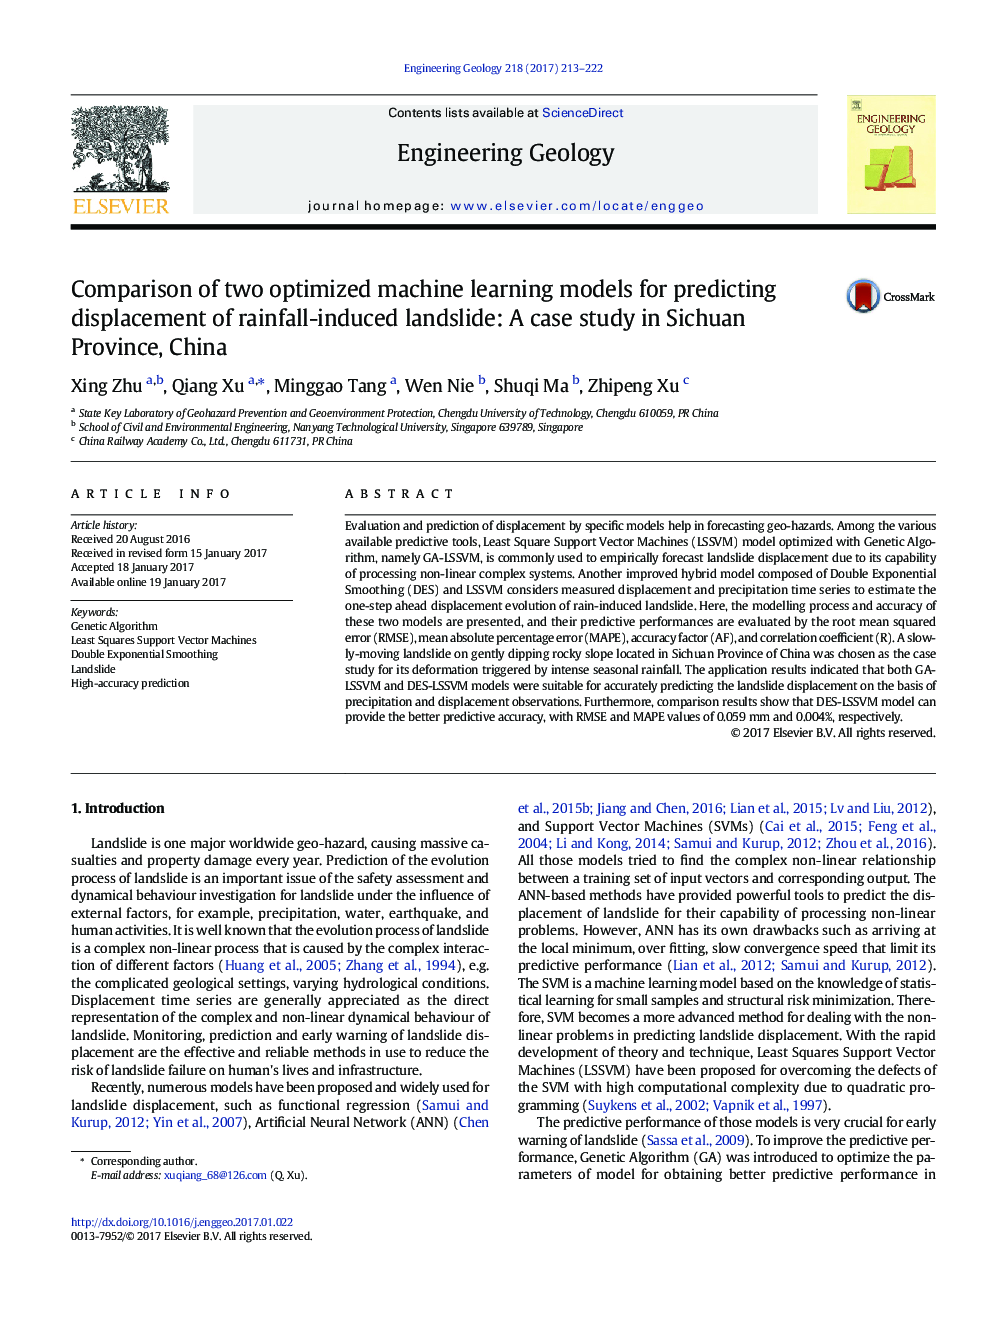 Comparison of two optimized machine learning models for predicting displacement of rainfall-induced landslide: A case study in Sichuan Province, China